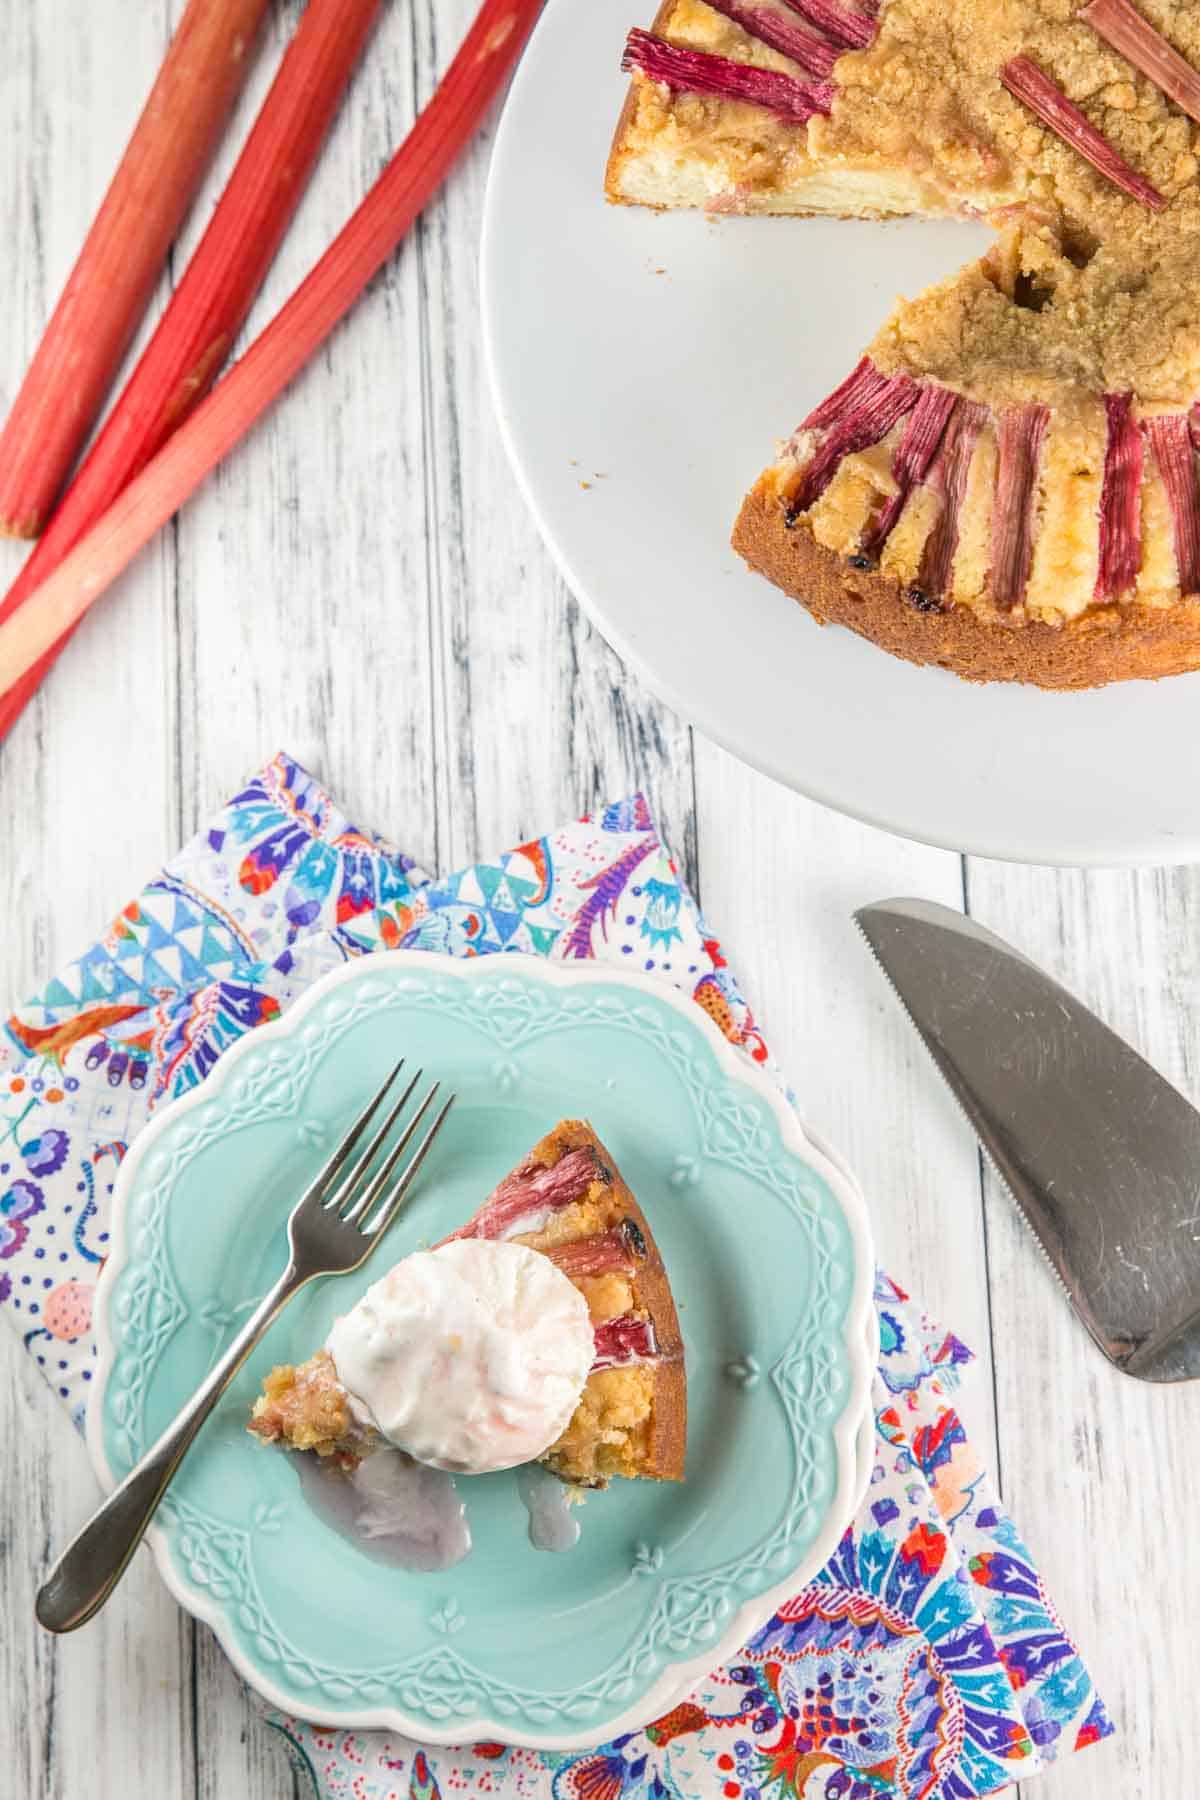 Almond Rhubarb Cake: a light and fluffy almond cake filled with sliced rhubarb. Top with ice cream and rhubarb syrup for an extra treat! {Bunsen Burner Bakery} [ad] #rhubarb #almond #cake #coffeecake